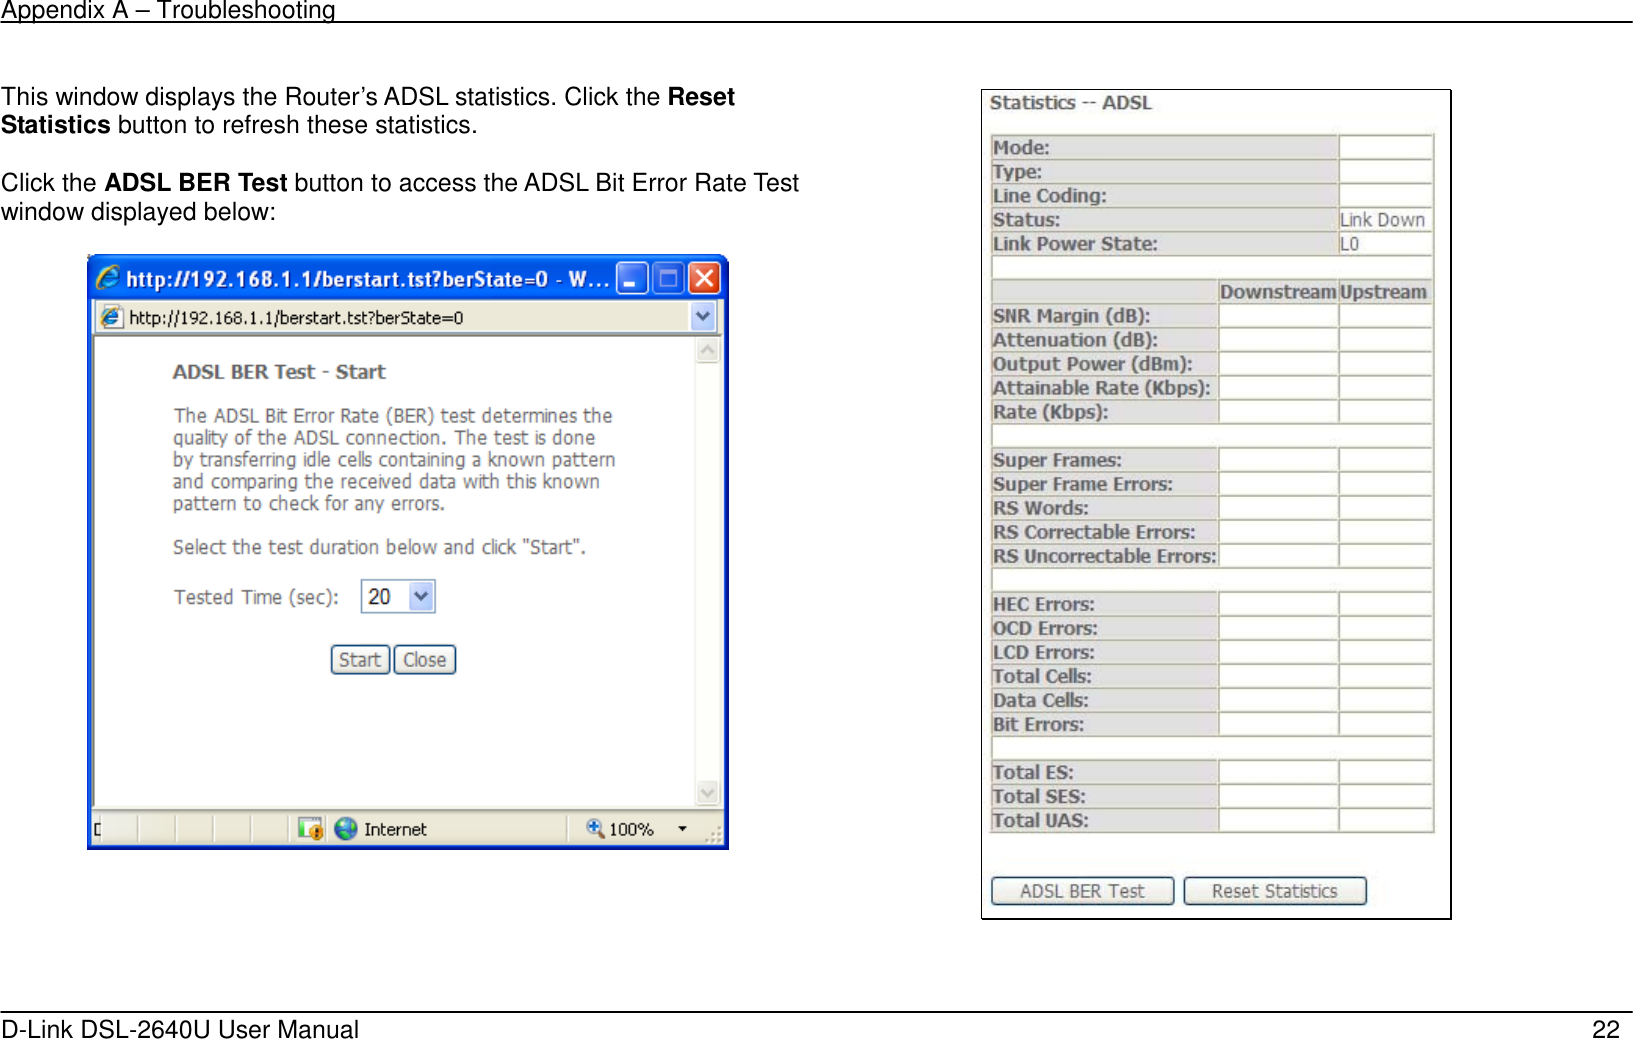 Appendix A – Troubleshooting   D-Link DSL-2640U User Manual    22    This window displays the Router’s ADSL statistics. Click the Reset Statistics button to refresh these statistics.  Click the ADSL BER Test button to access the ADSL Bit Error Rate Test window displayed below:       